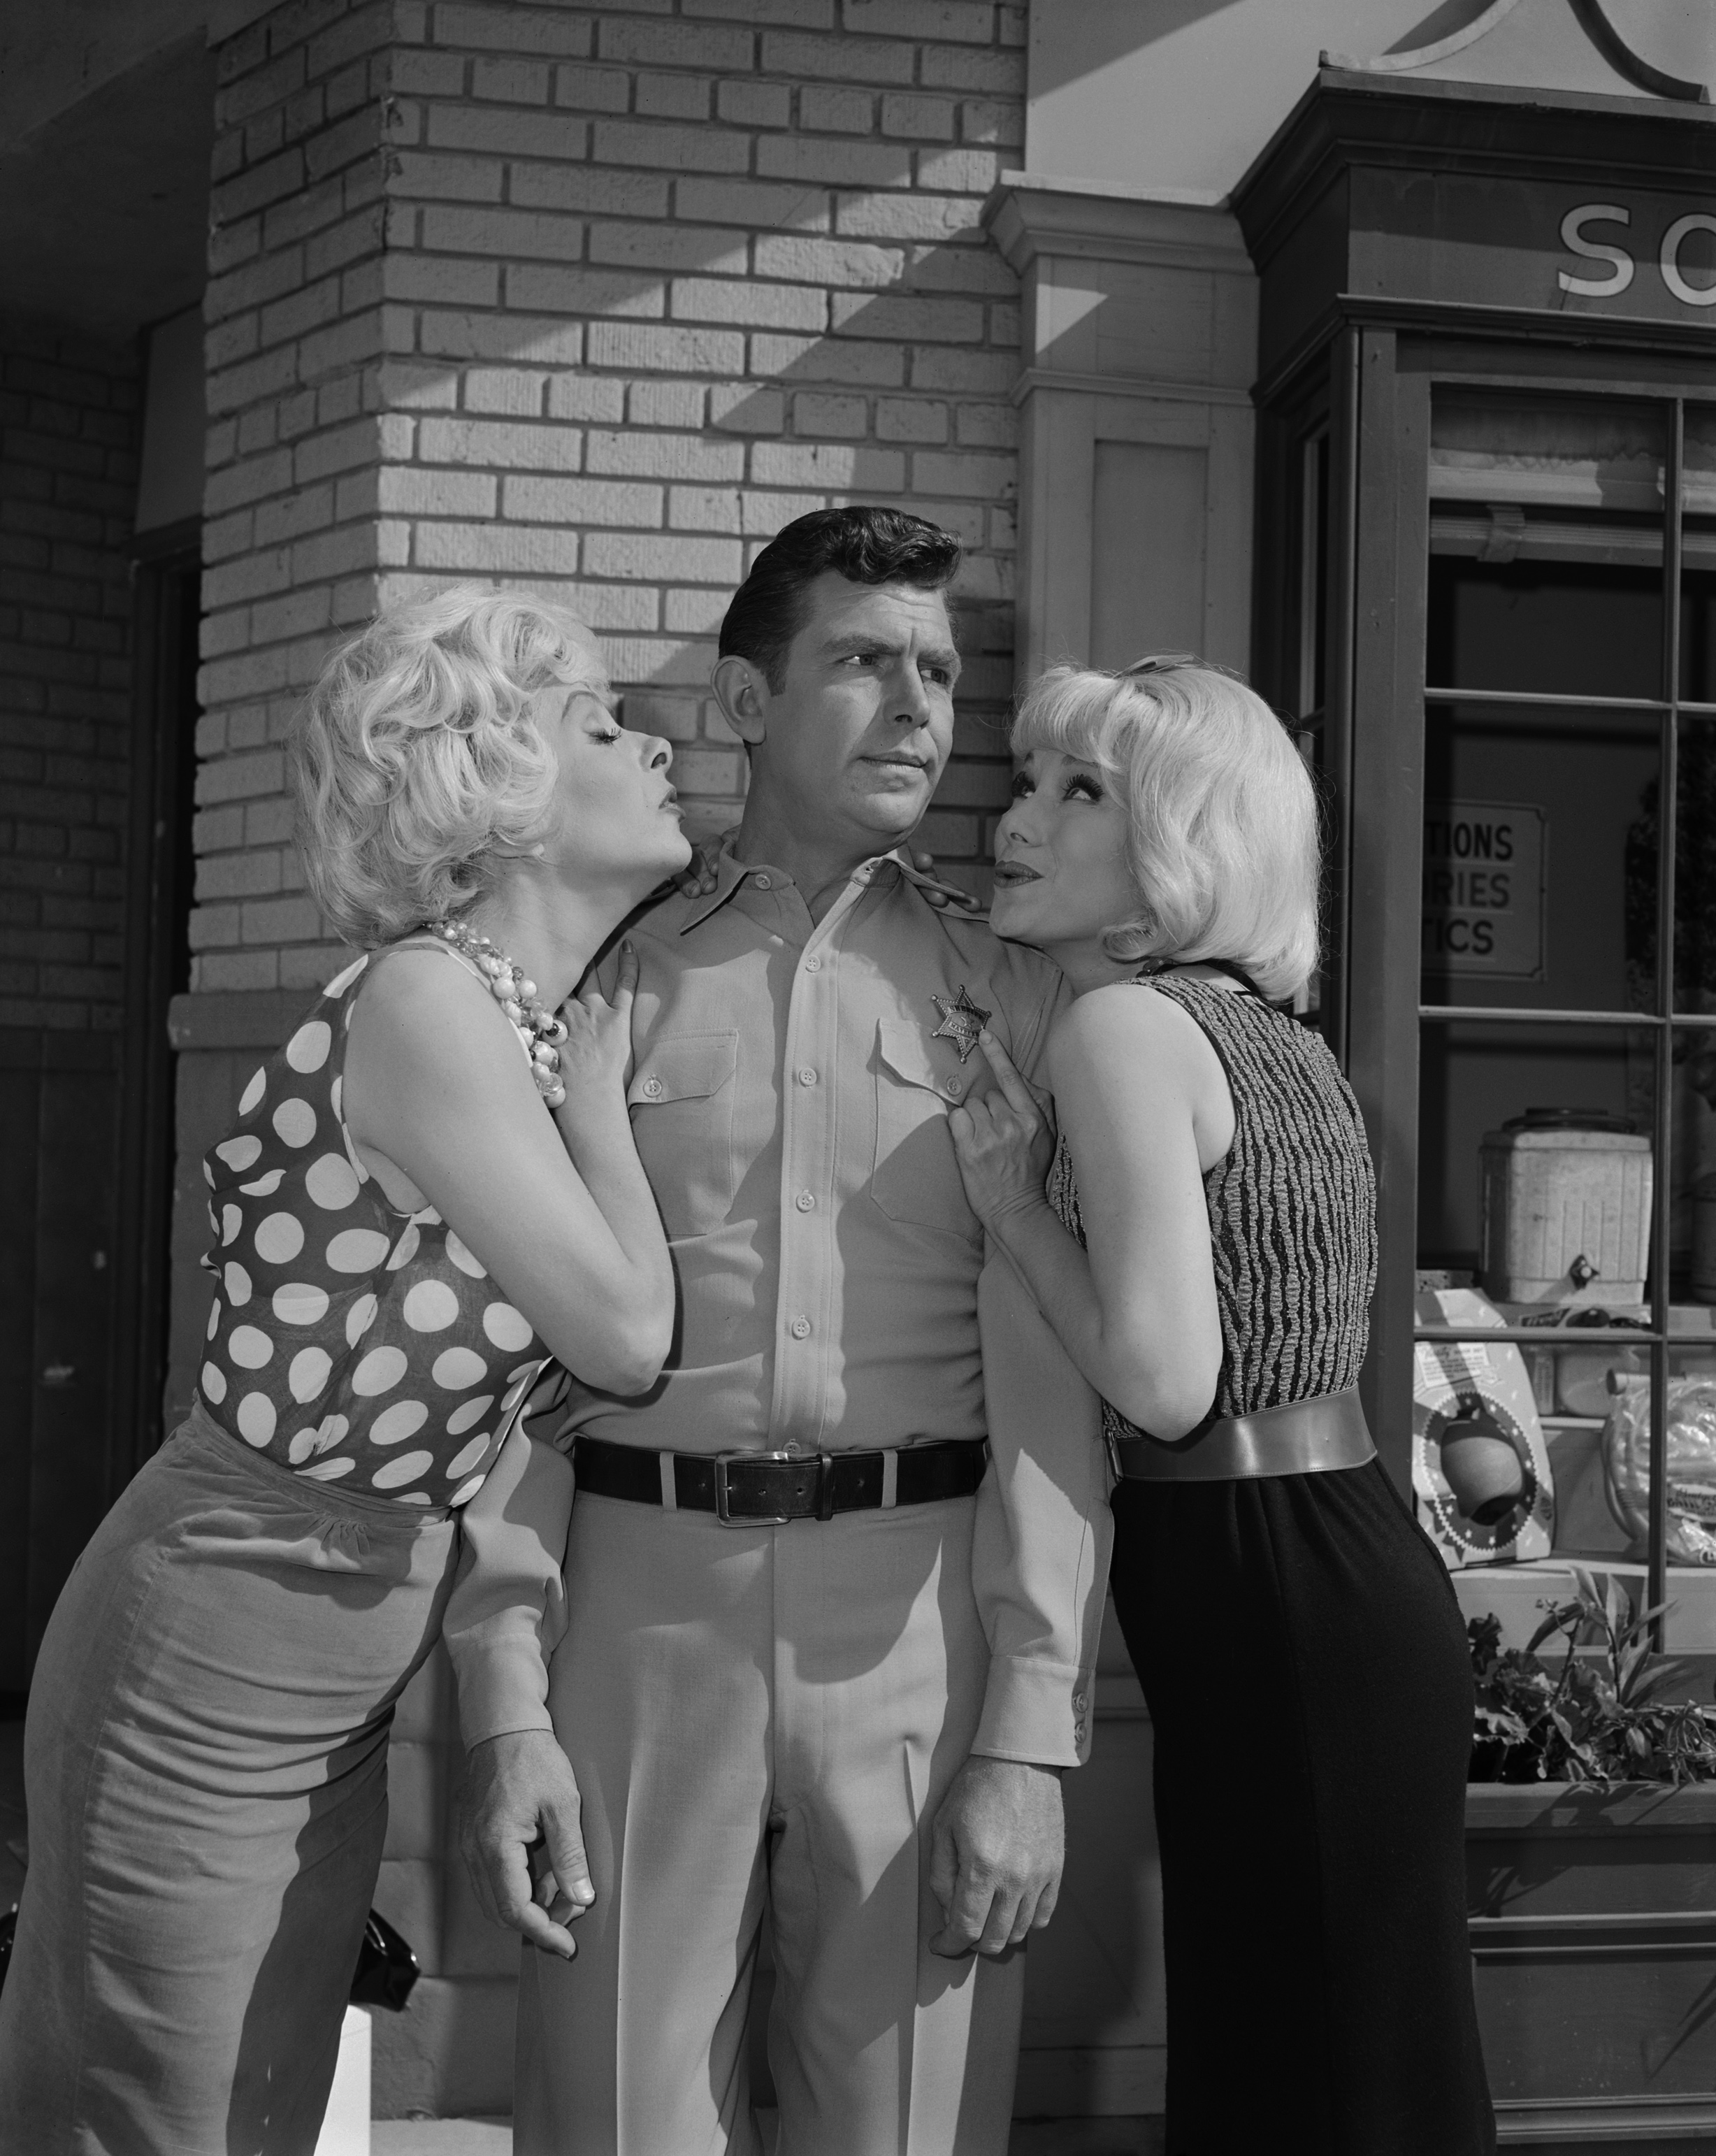 Andy Griffith, center, as Sheriff Andy Taylor surrounded by 'The Andy Griffith Show's 'Fun Girls' Jean Carson and Joyce Jameson, 1964